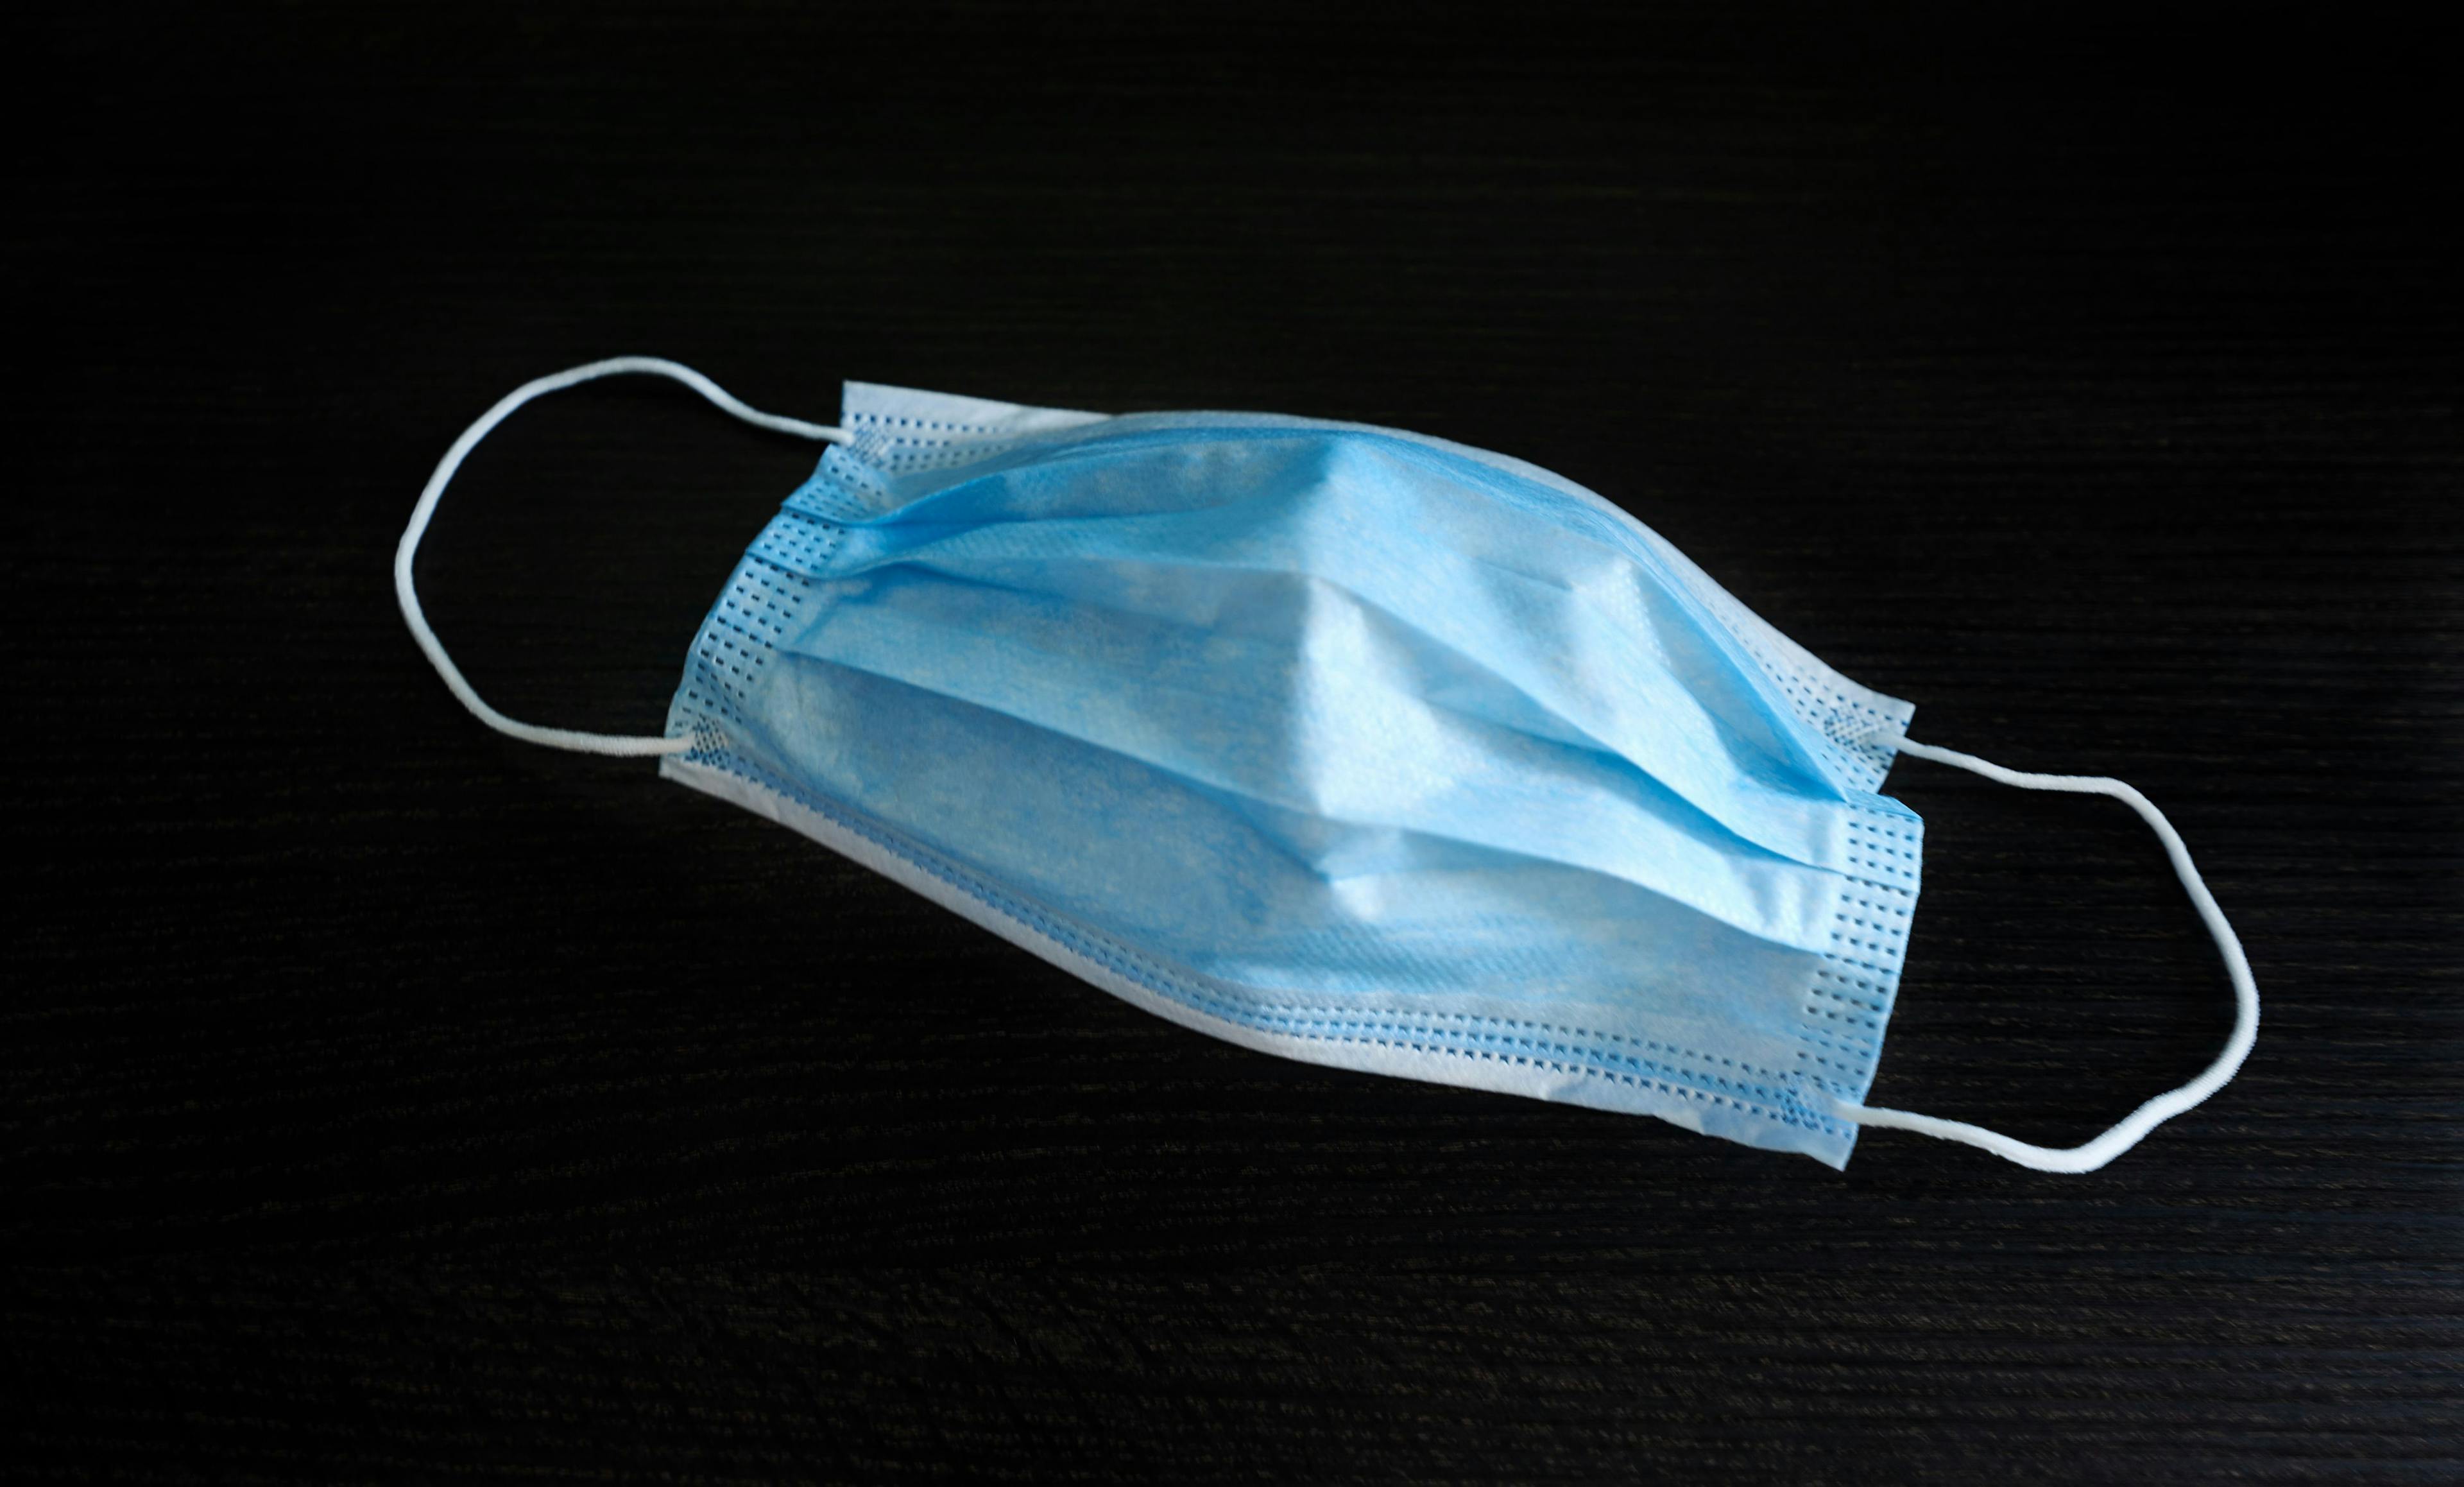 A blue surgical mask on a black background